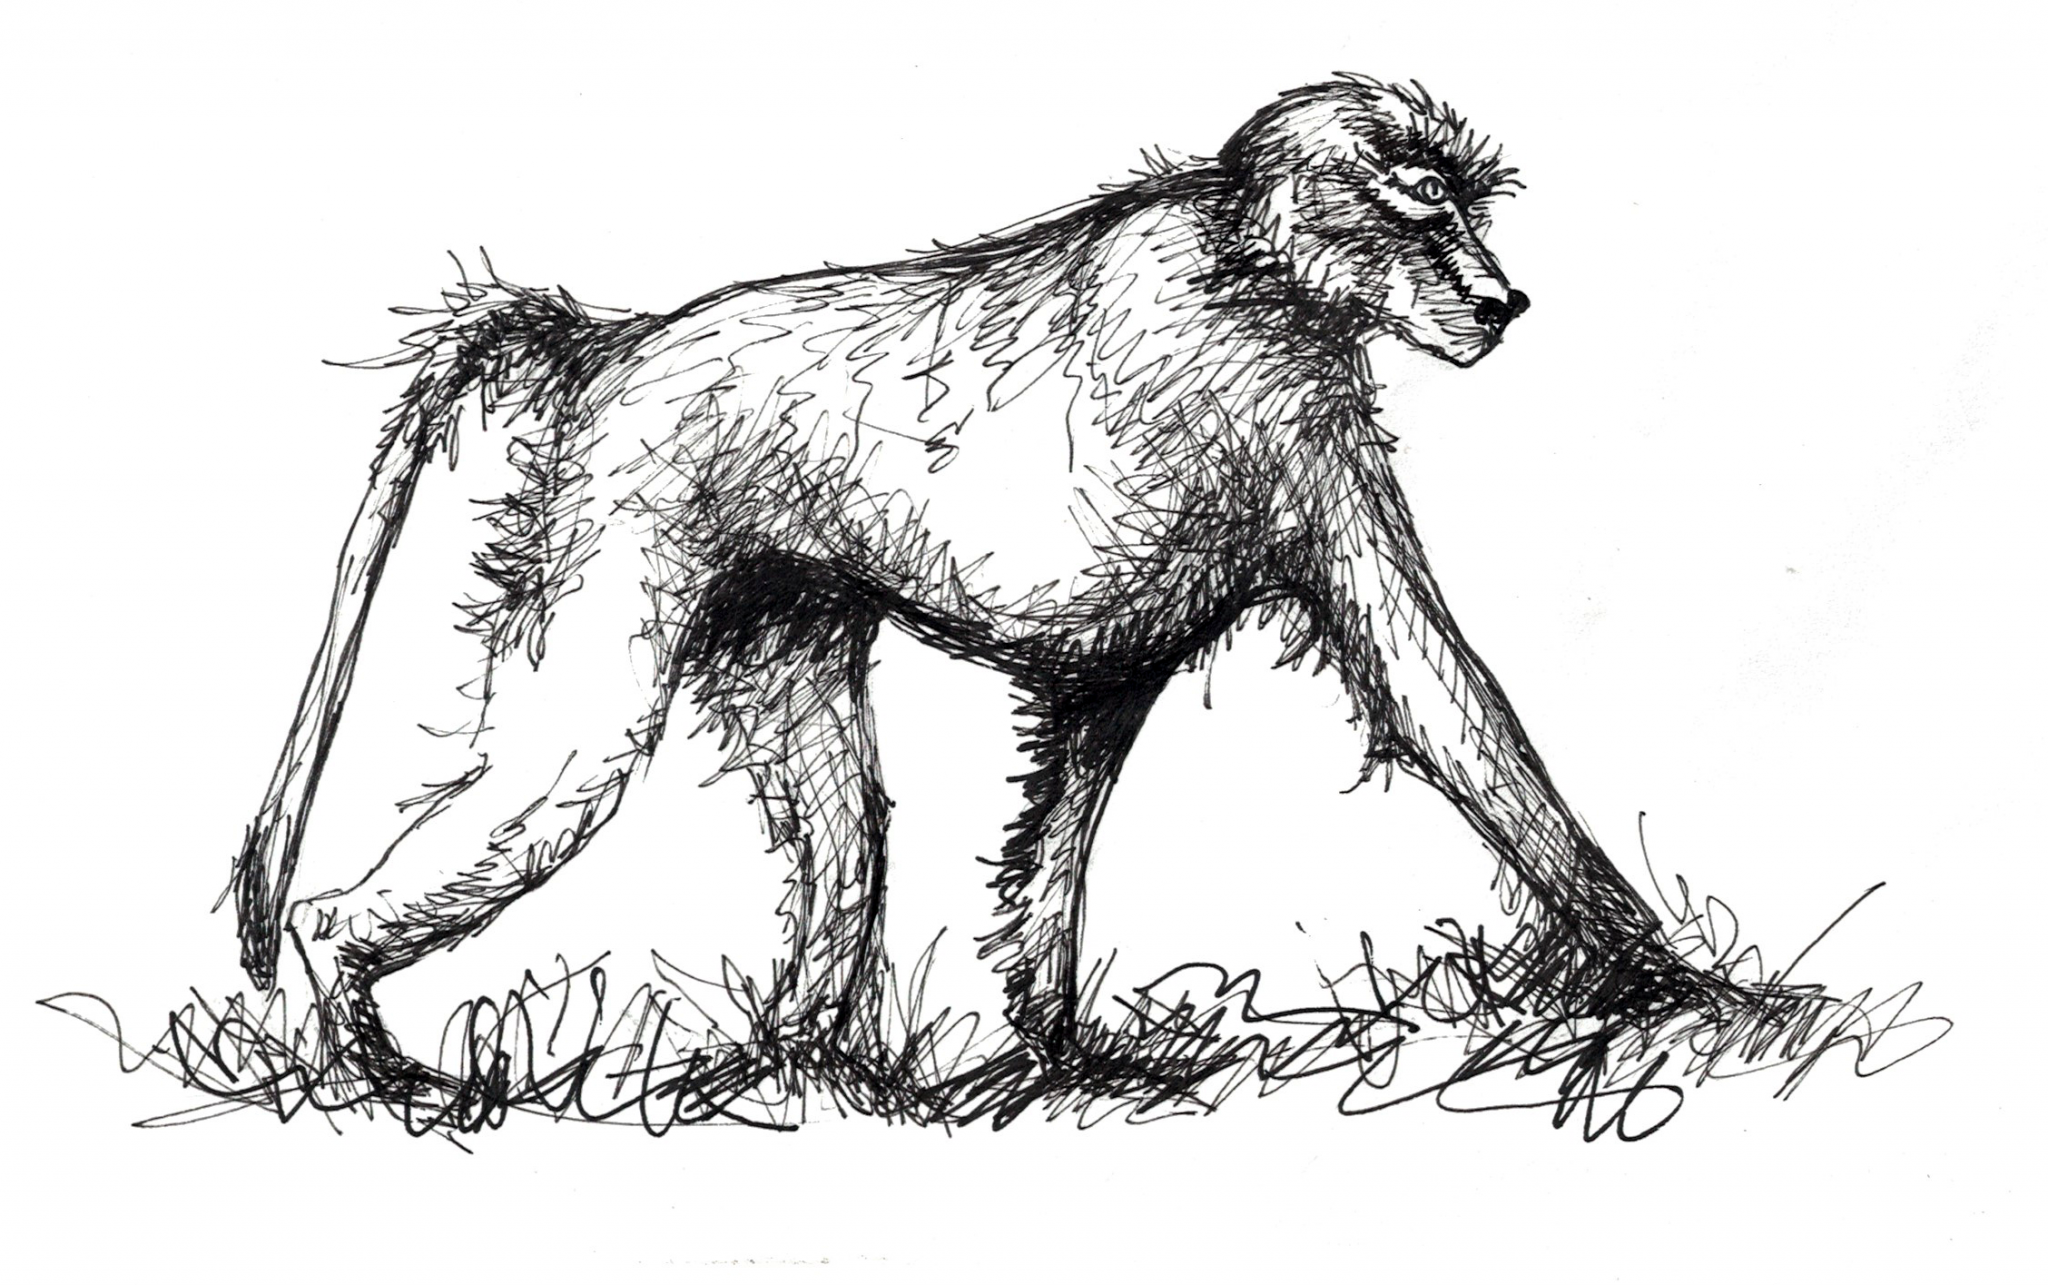 Illustration of a typical quadrupedal primate.